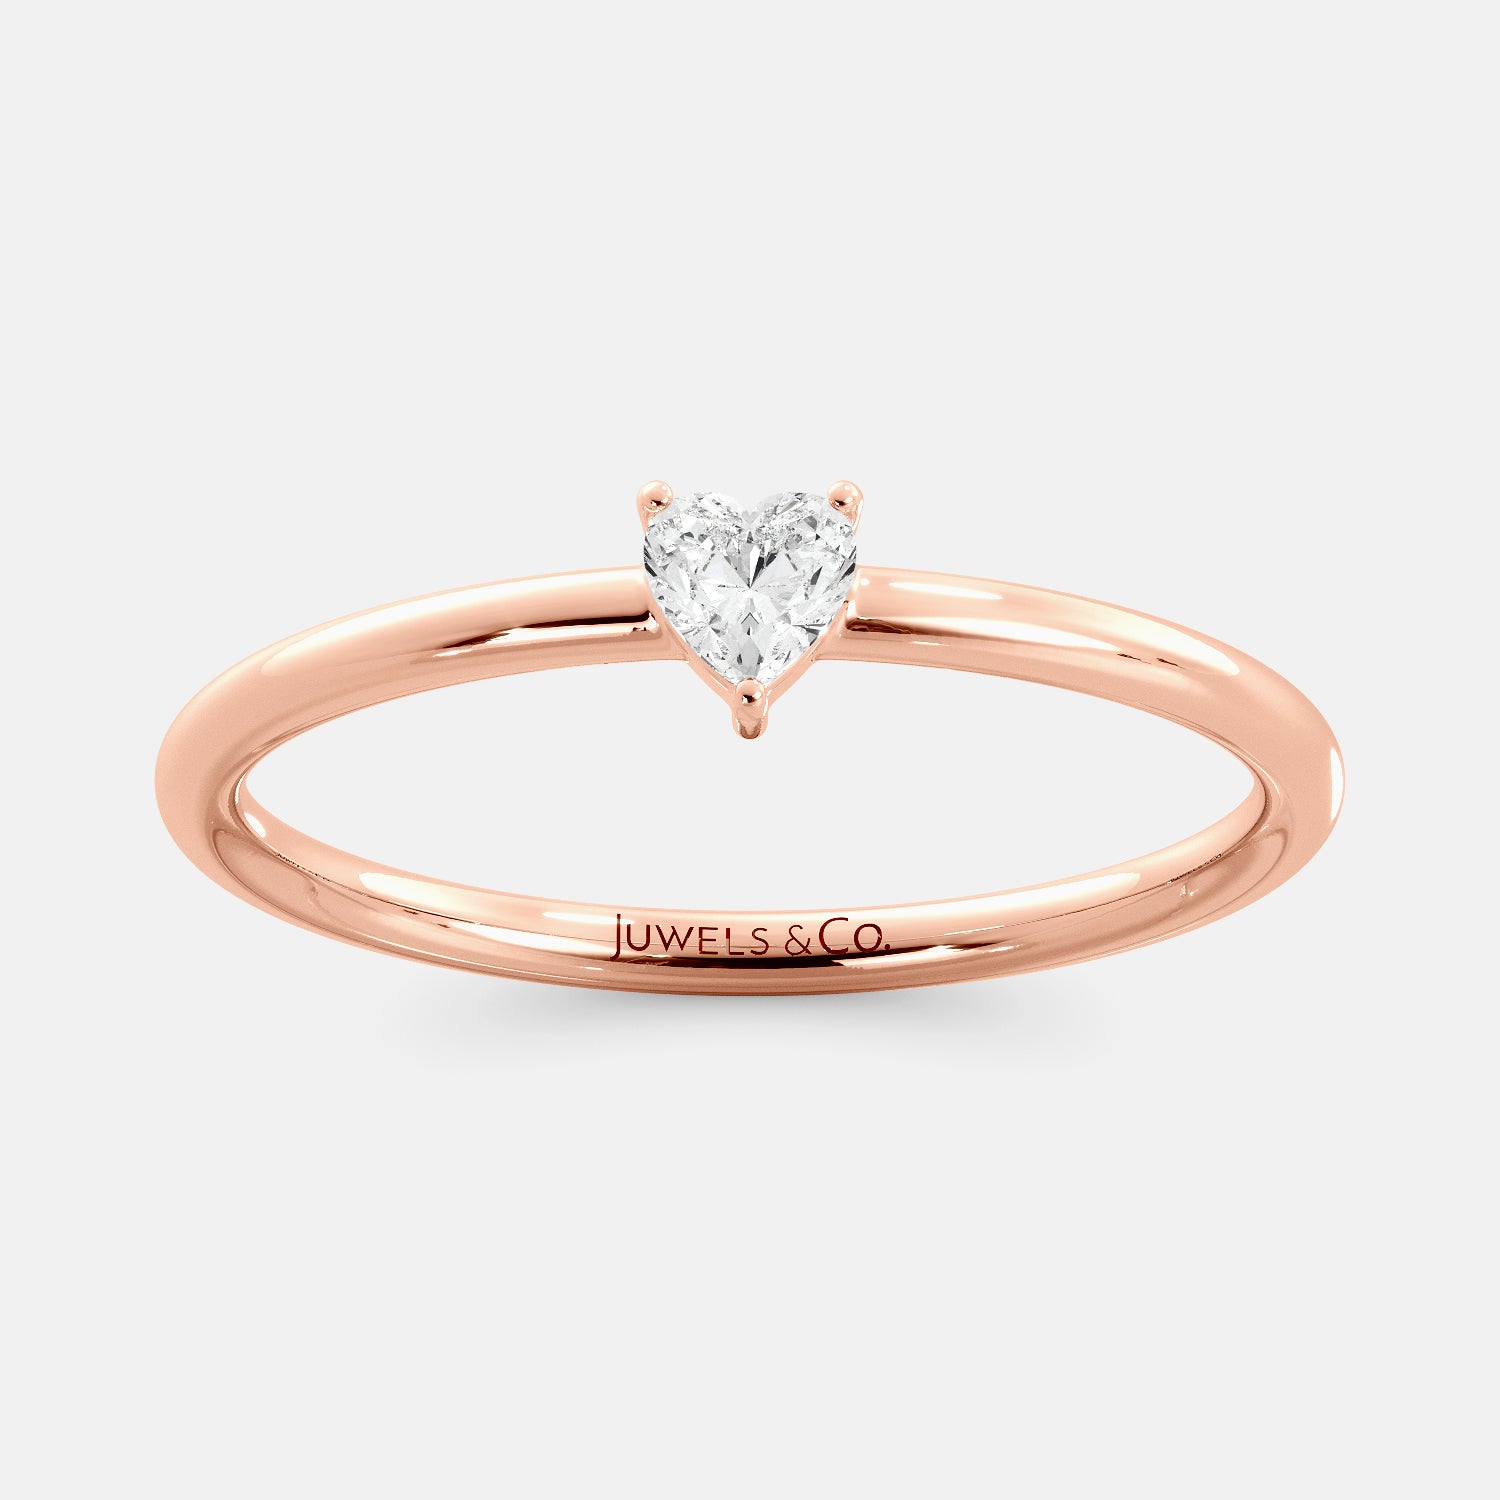 A close-up of a heart-shaped solitaire diamond ring in recycled rose gold. The ring is set with a single, large diamond in the center of a heart-shaped setting. The ring is made of recycled rose gold and has a simple, elegant design. The diamond is sparkling and reflects light beautifully. The ring is a perfect gift for a loved one or a special occasion.